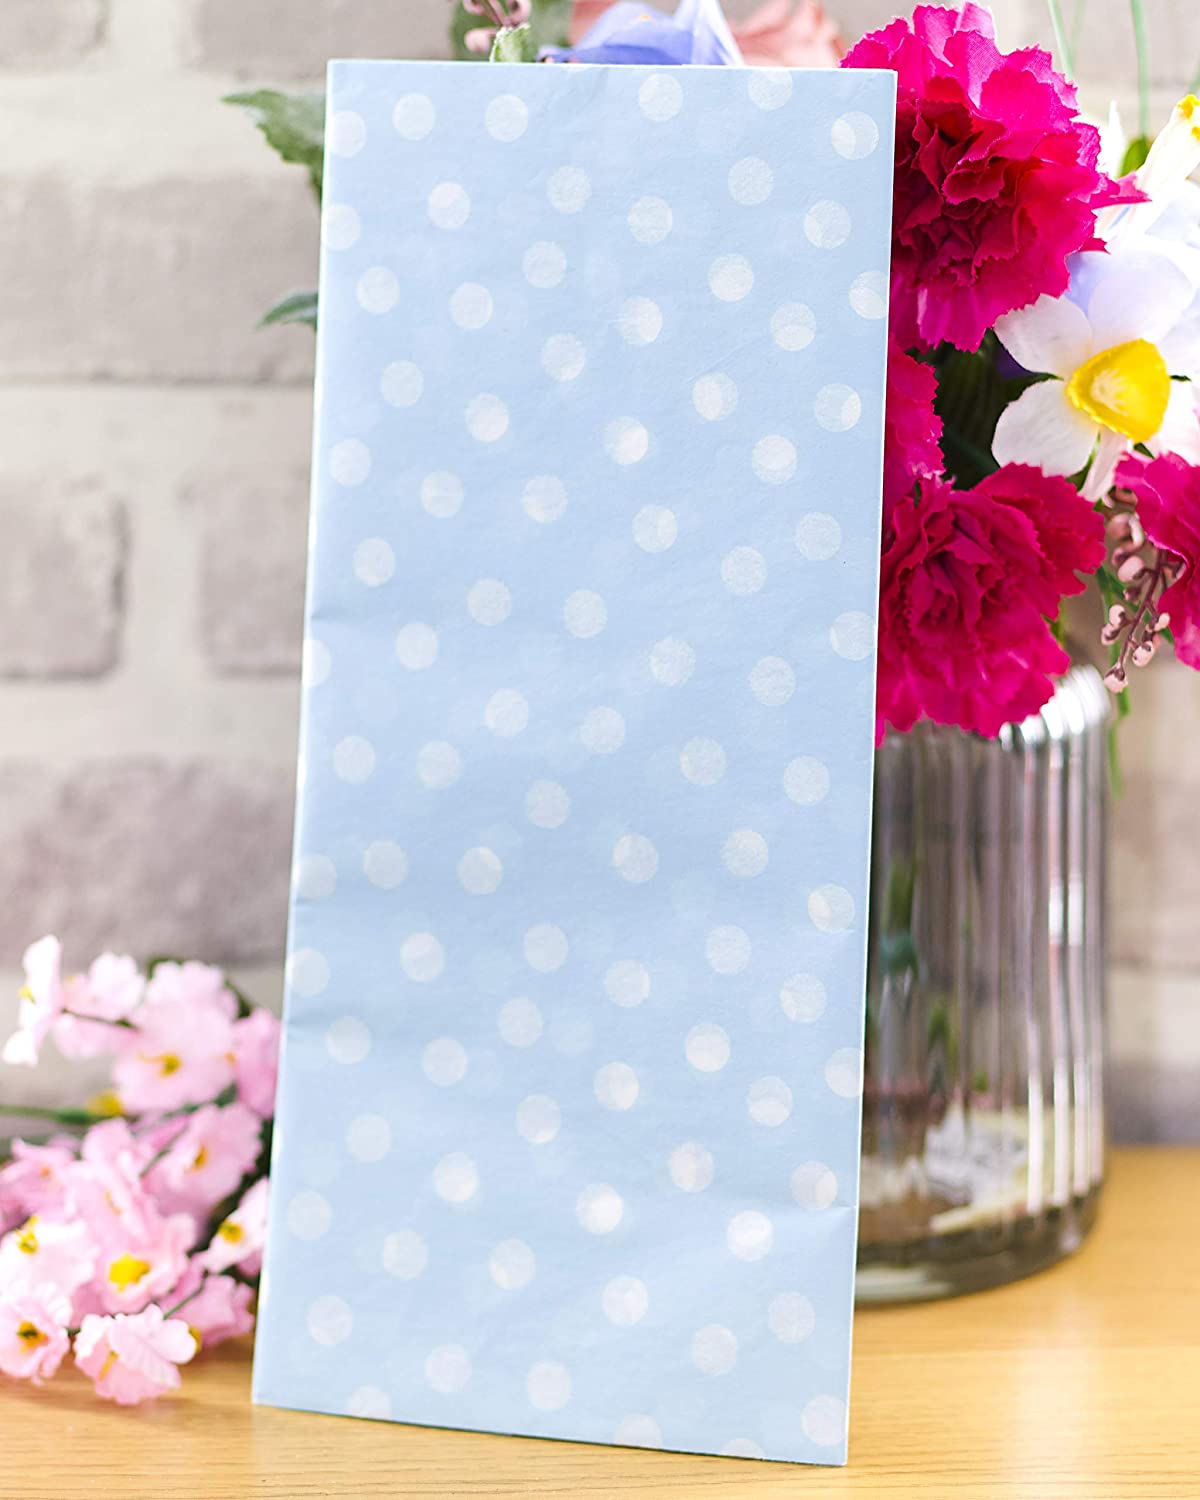 Blue and White Polka Dot Design  3 Sheets Tissue Paper for Gift Bags